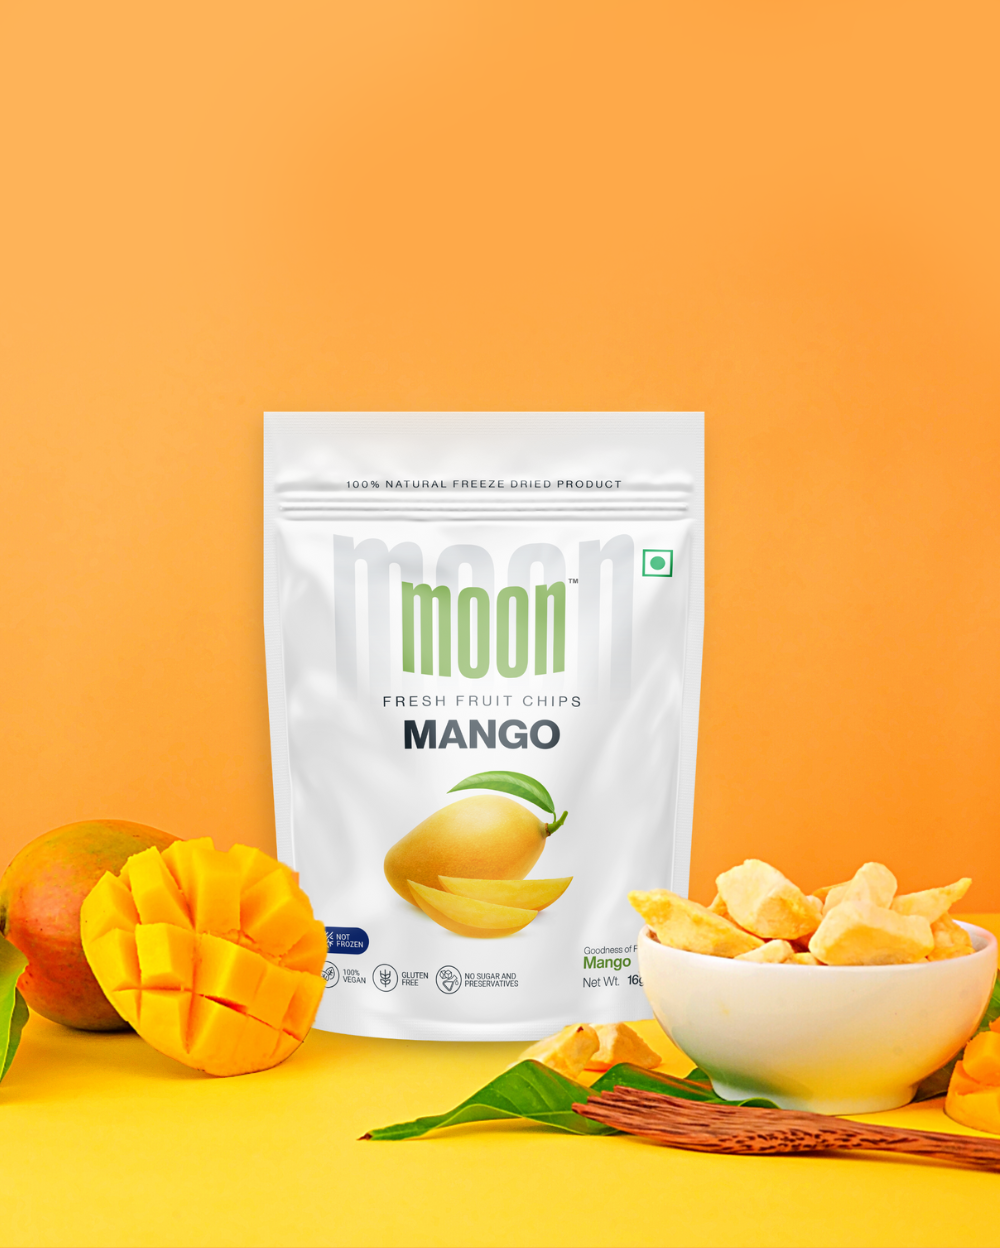 Packaging of Moon Freeze Dried Mango Cubes - Pack of 3 on a vibrant orange background, alongside fresh mango slices and some tropical chips outside the pack.